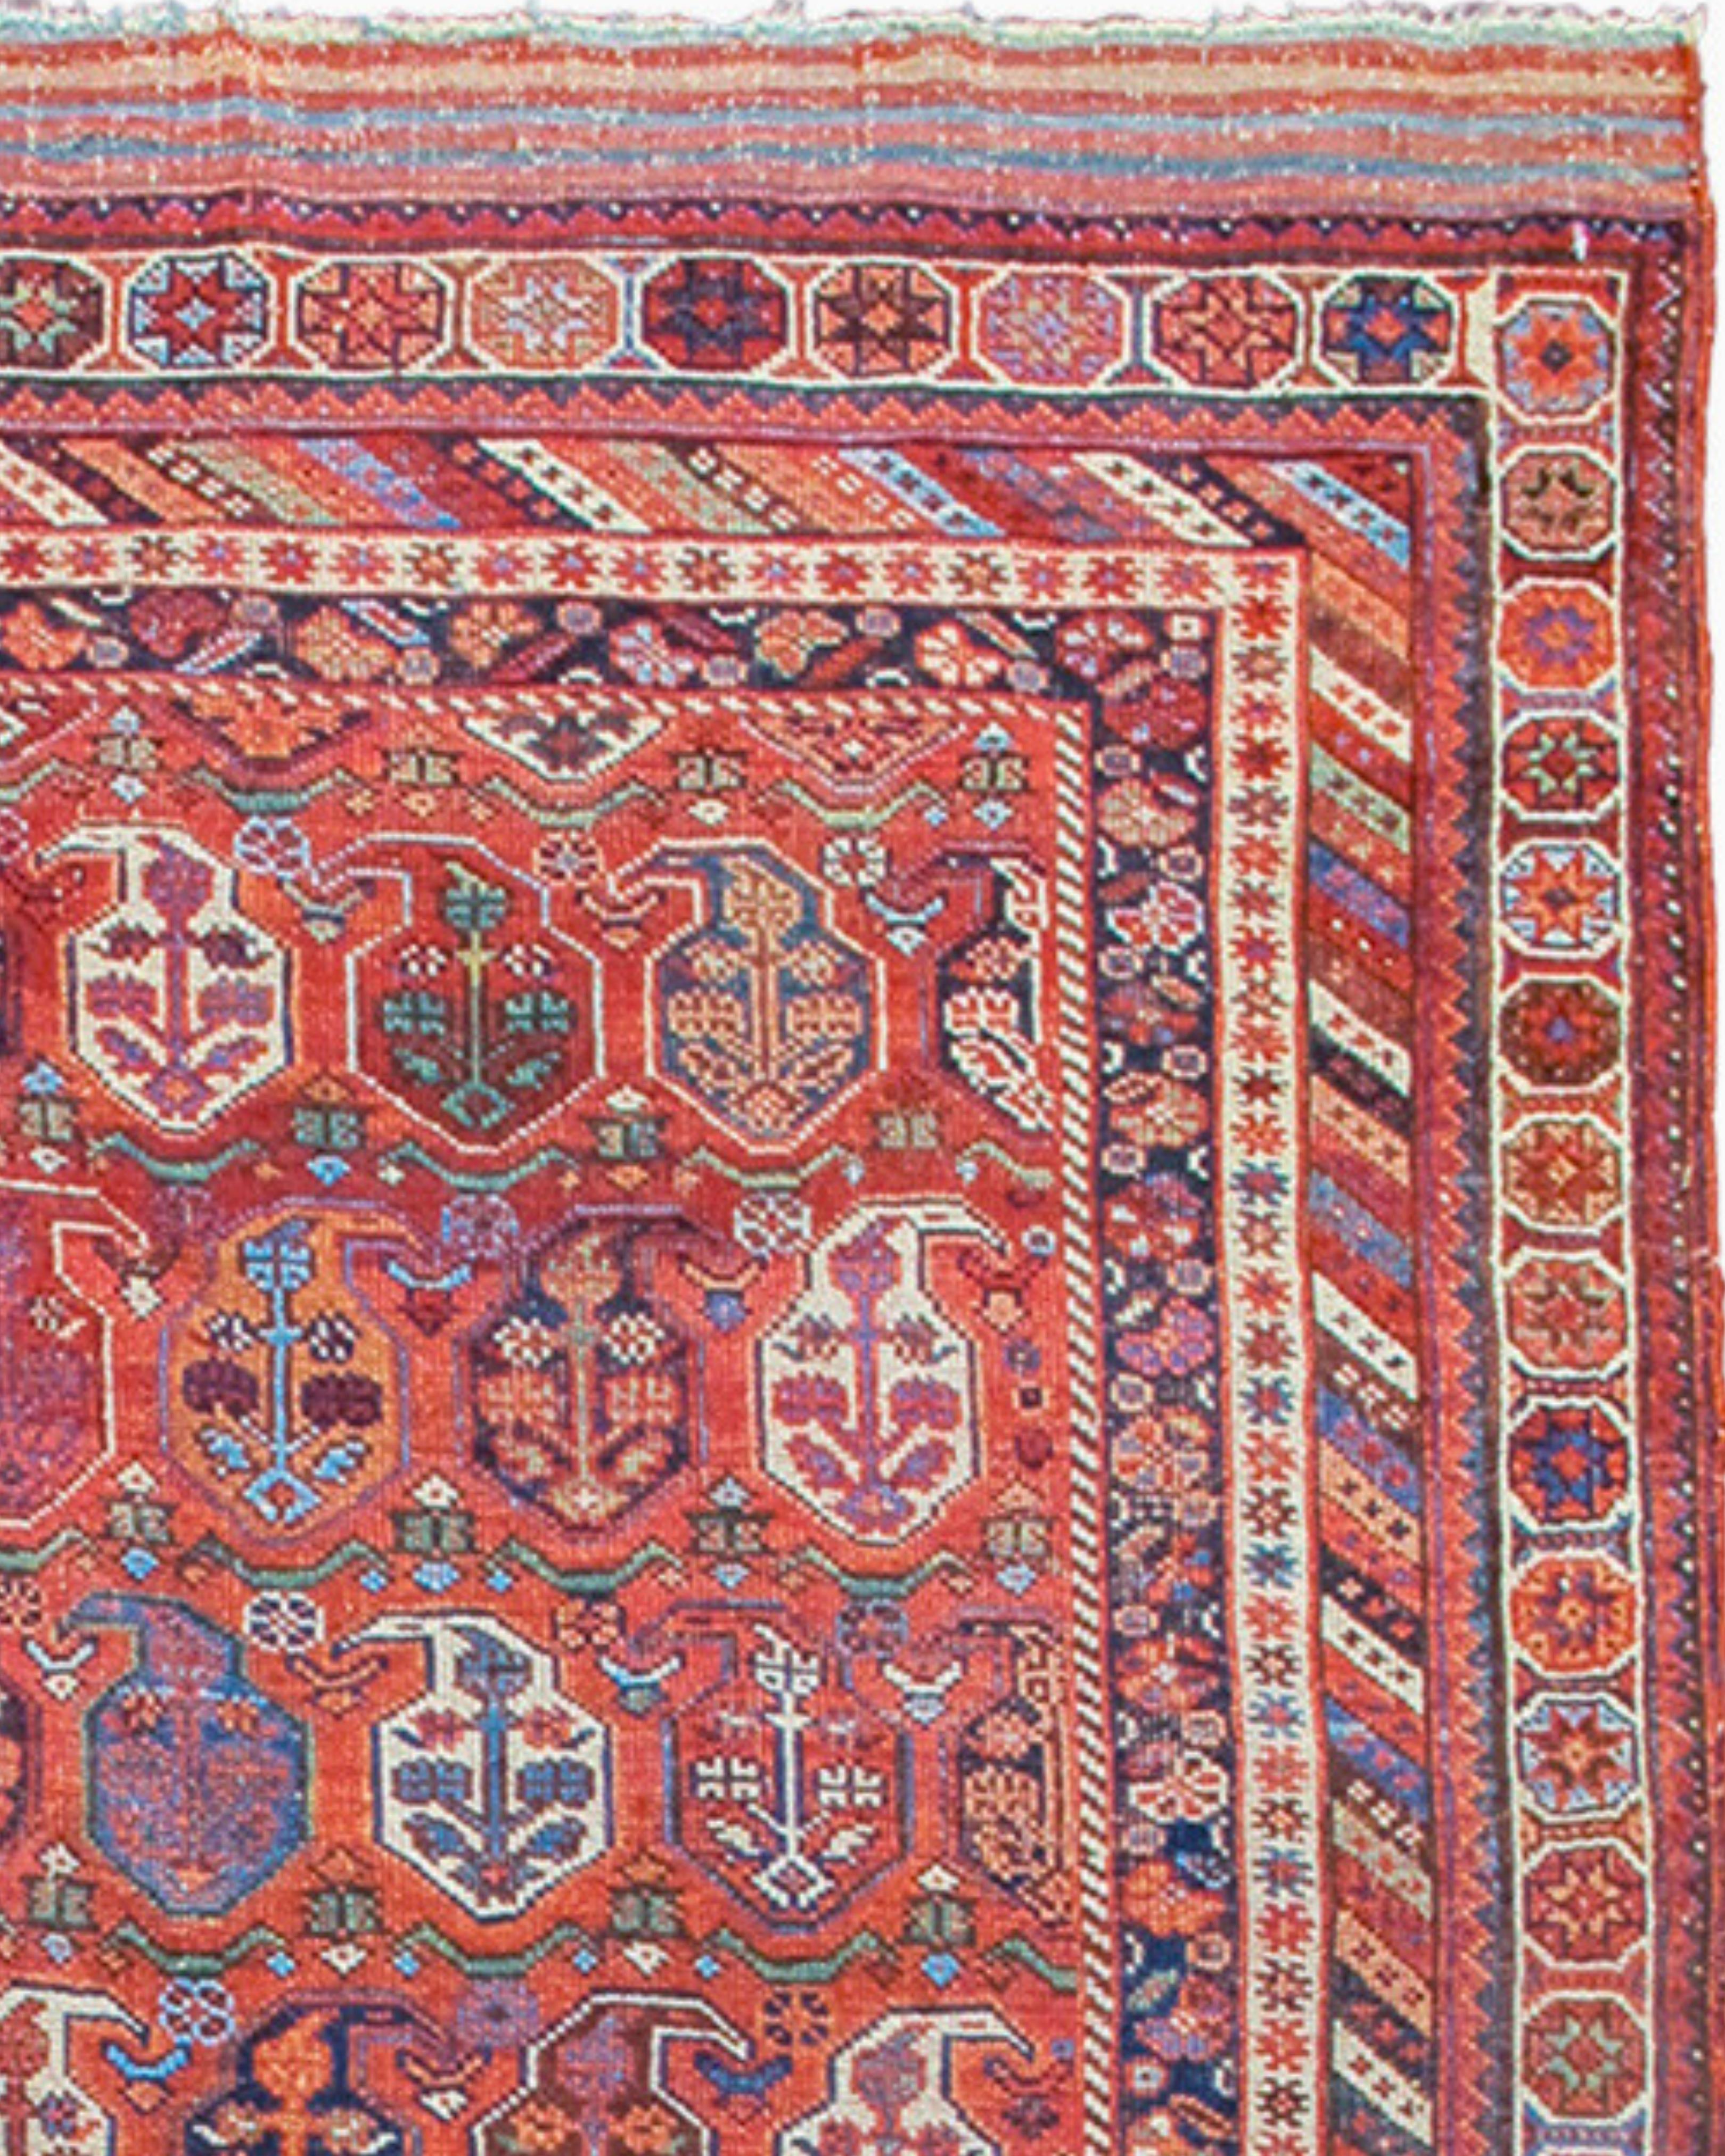 Antique Persian Afshar Rug, Late 19th Century

Additional Information:
Dimensions: 6'0